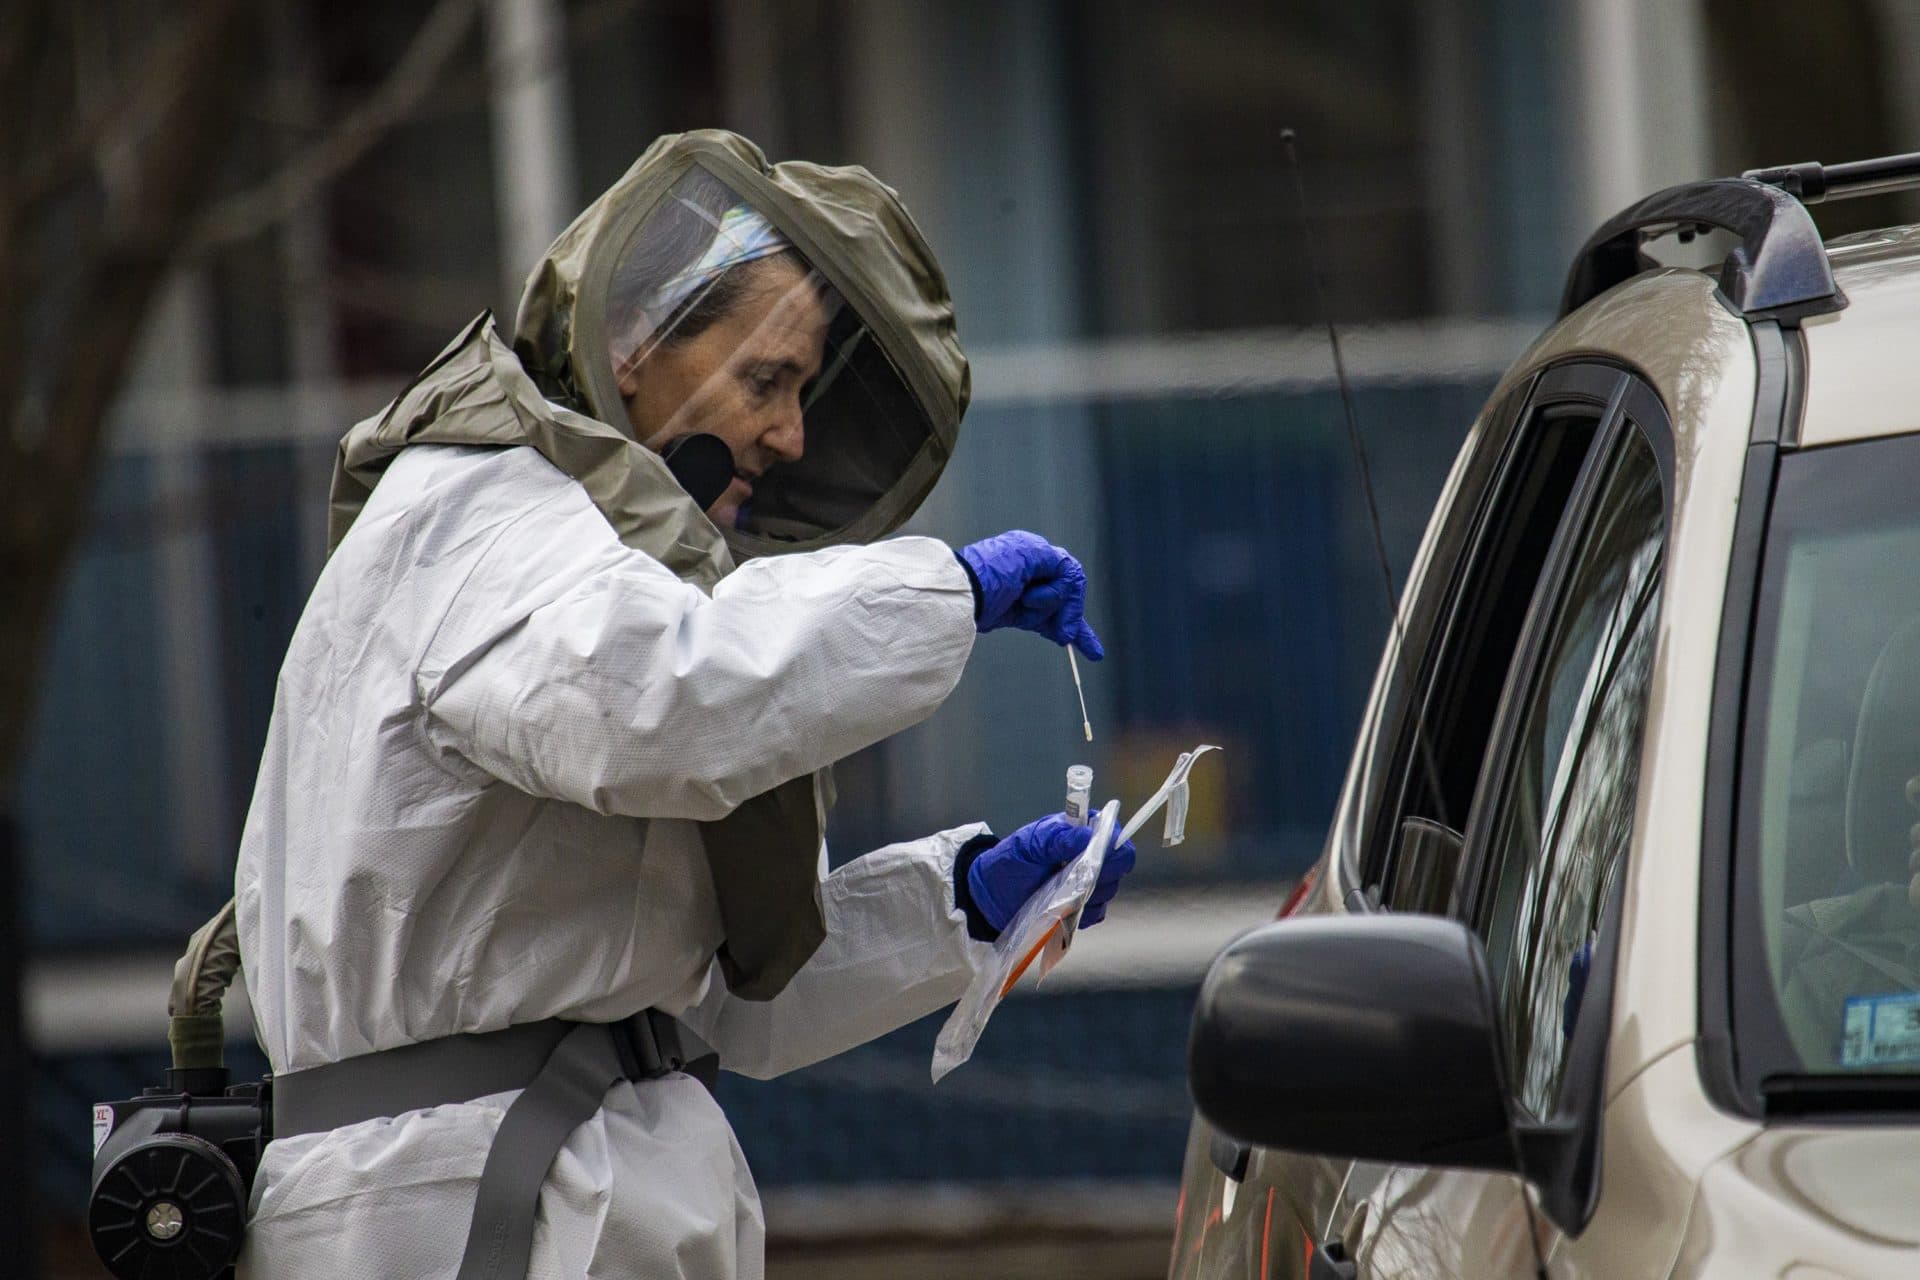 March 22: A health care worker places a cotton swab into a vile after taking a sample from someone being tested for COVID-19 at a drive-thru testing area at Somerville Hospital. (Jesse Costa/WBUR)